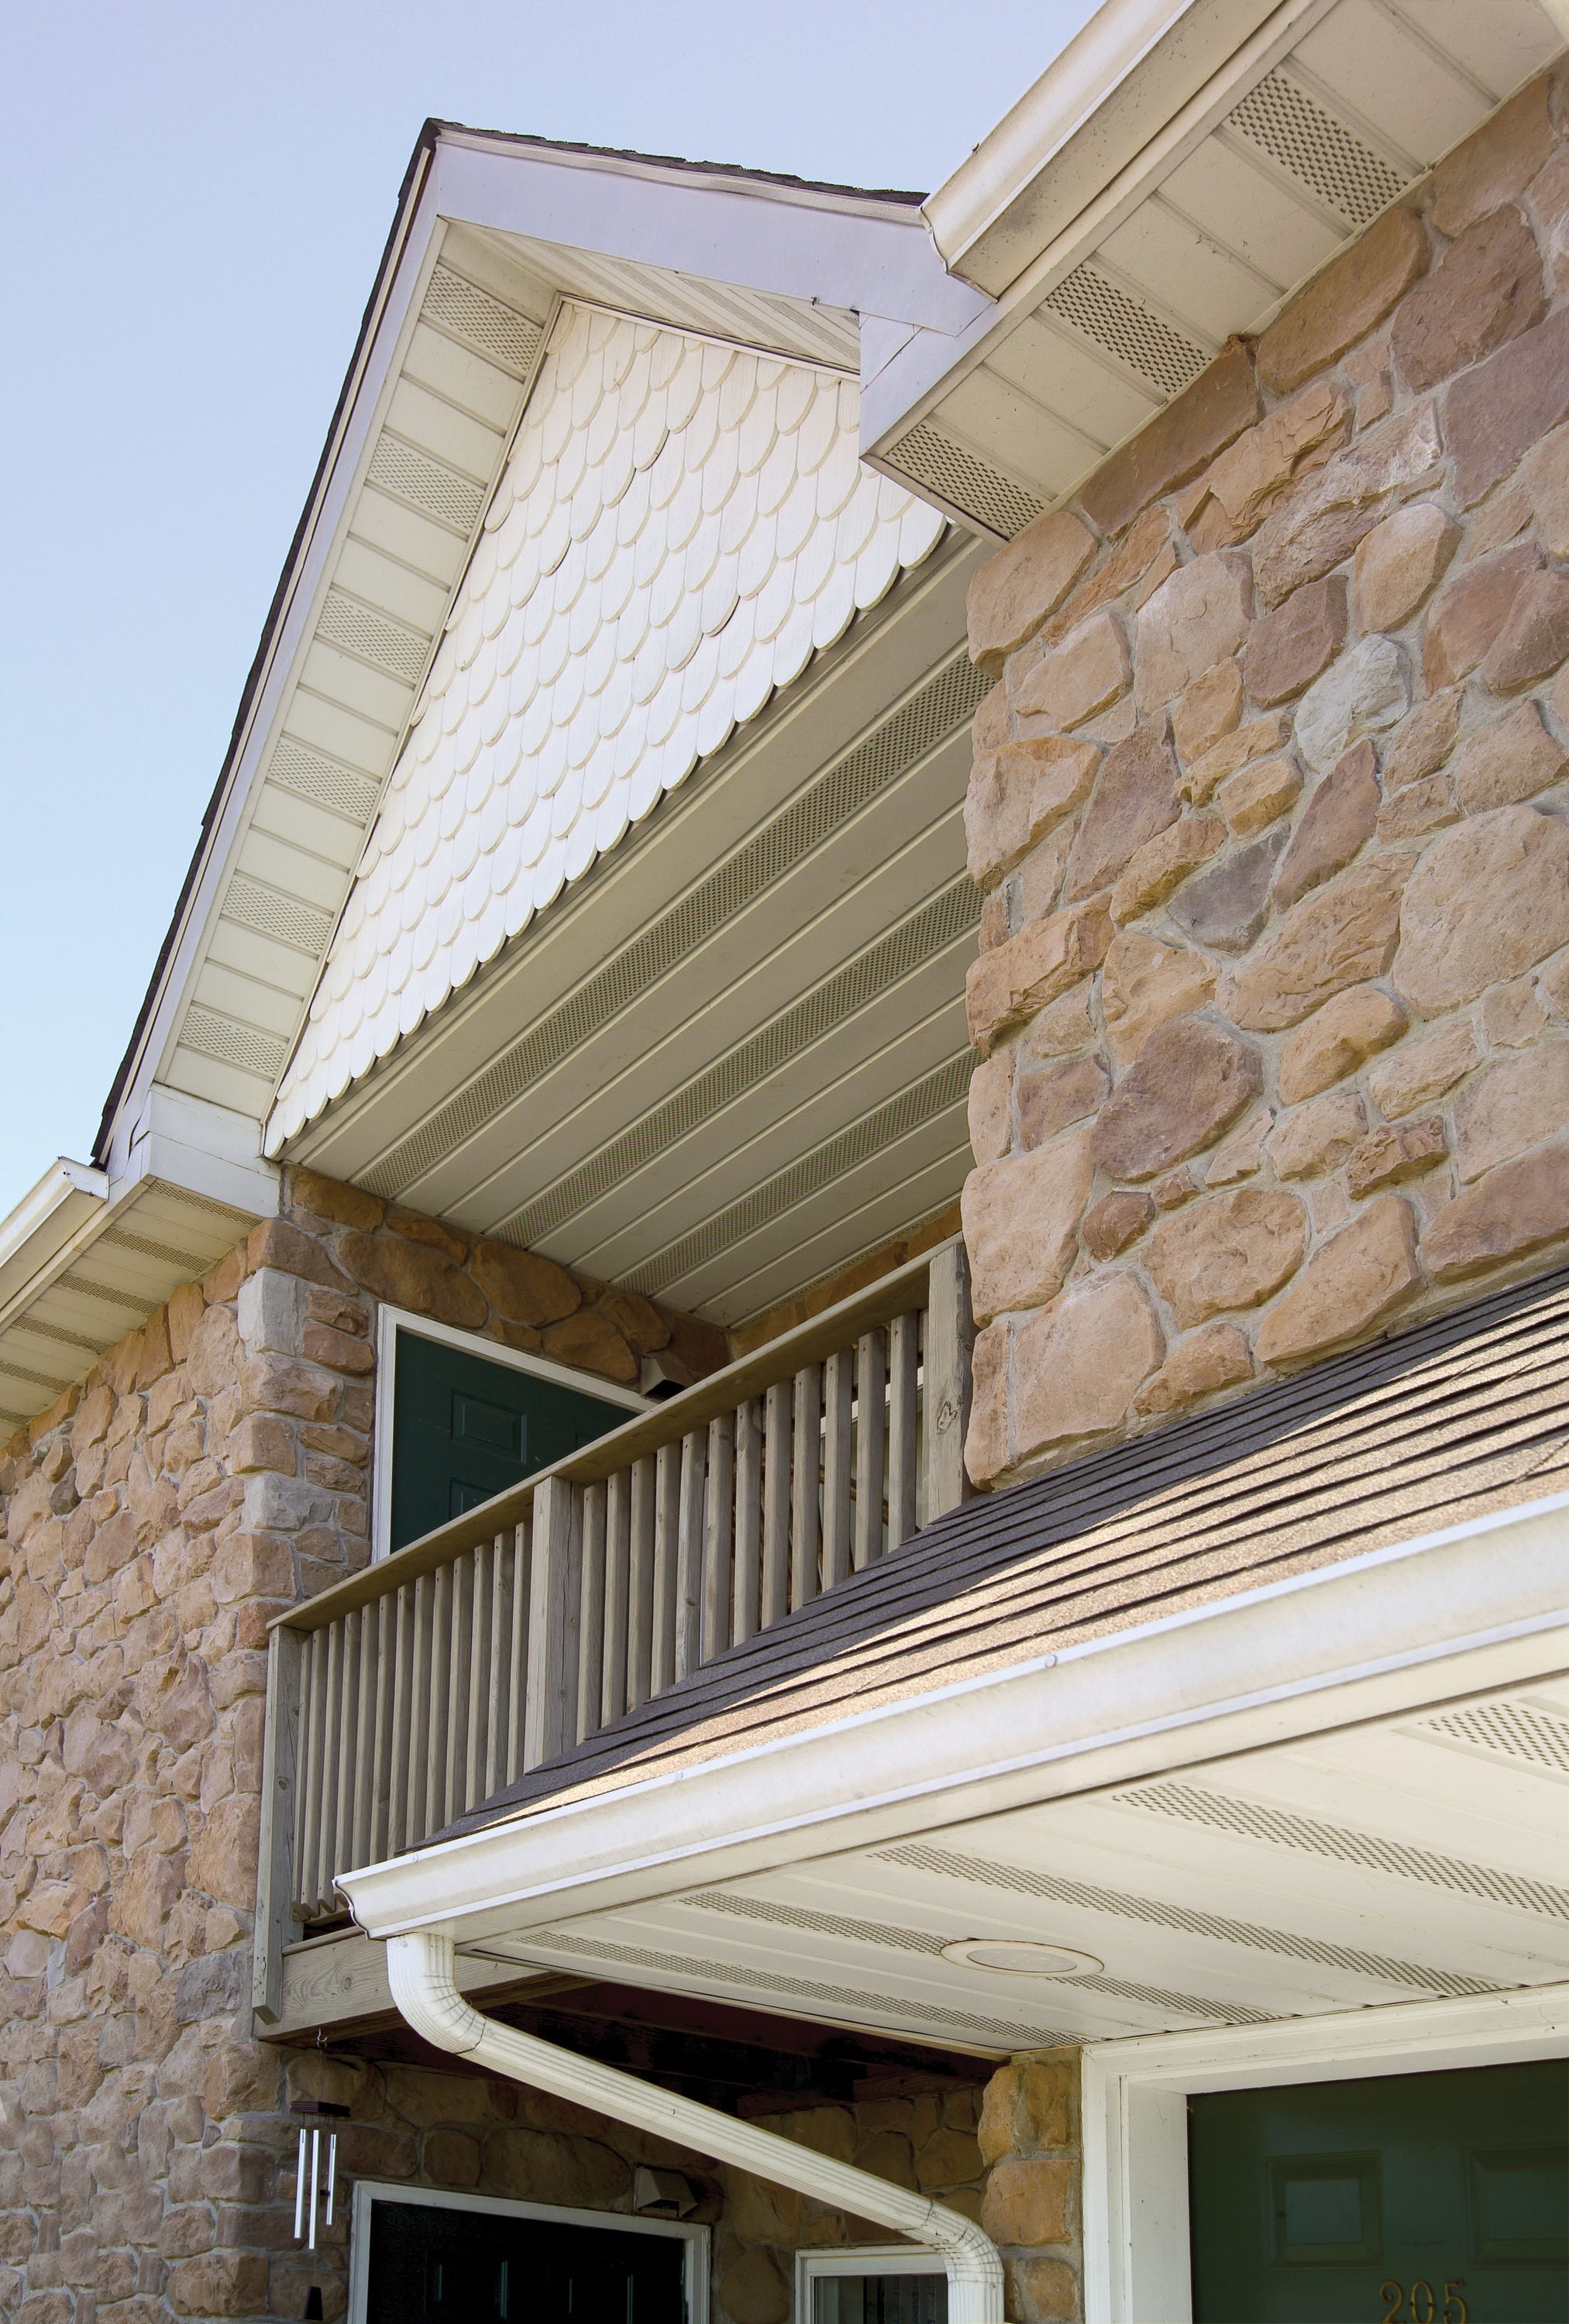 Should You Use F-Channel or J-Channel for Soffit?